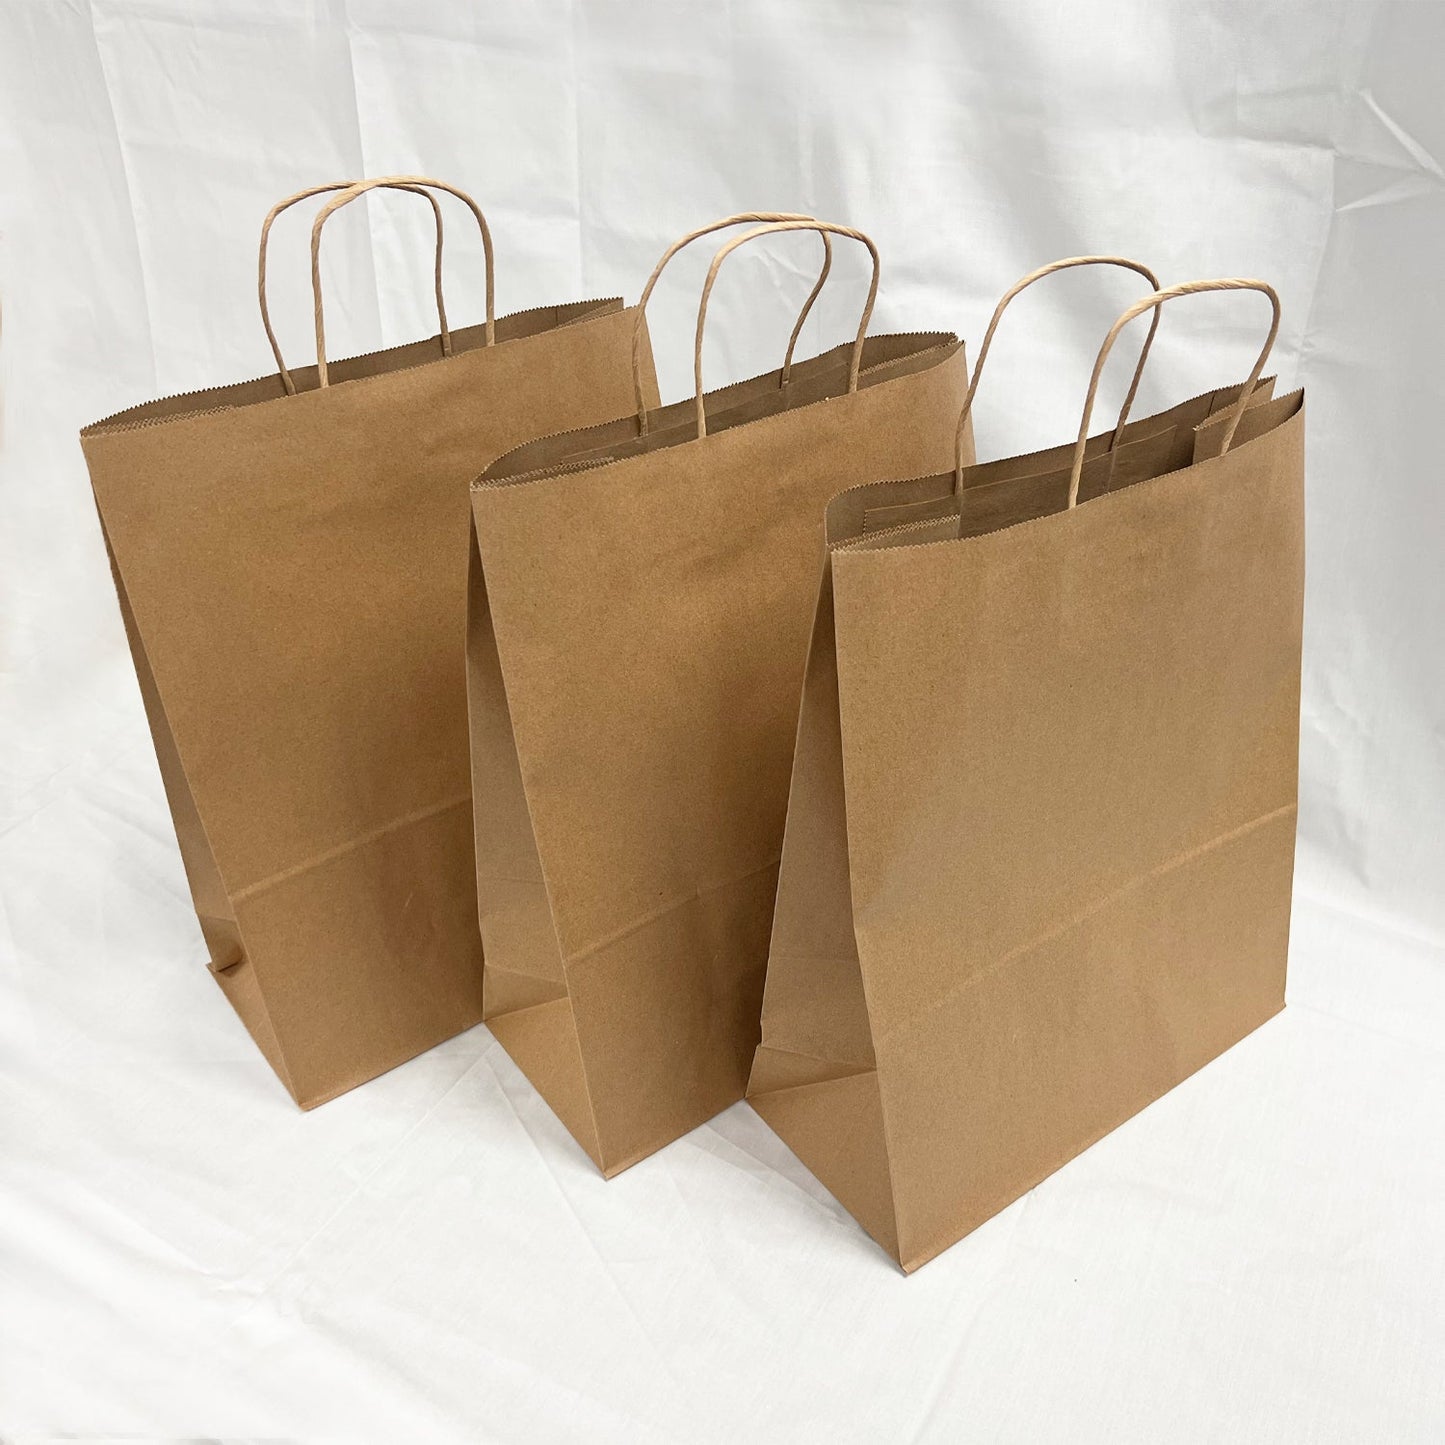 250 Pcs, Traveler,  13x6x16 inches, Euro Tote Paper Bags, with Rope Handle